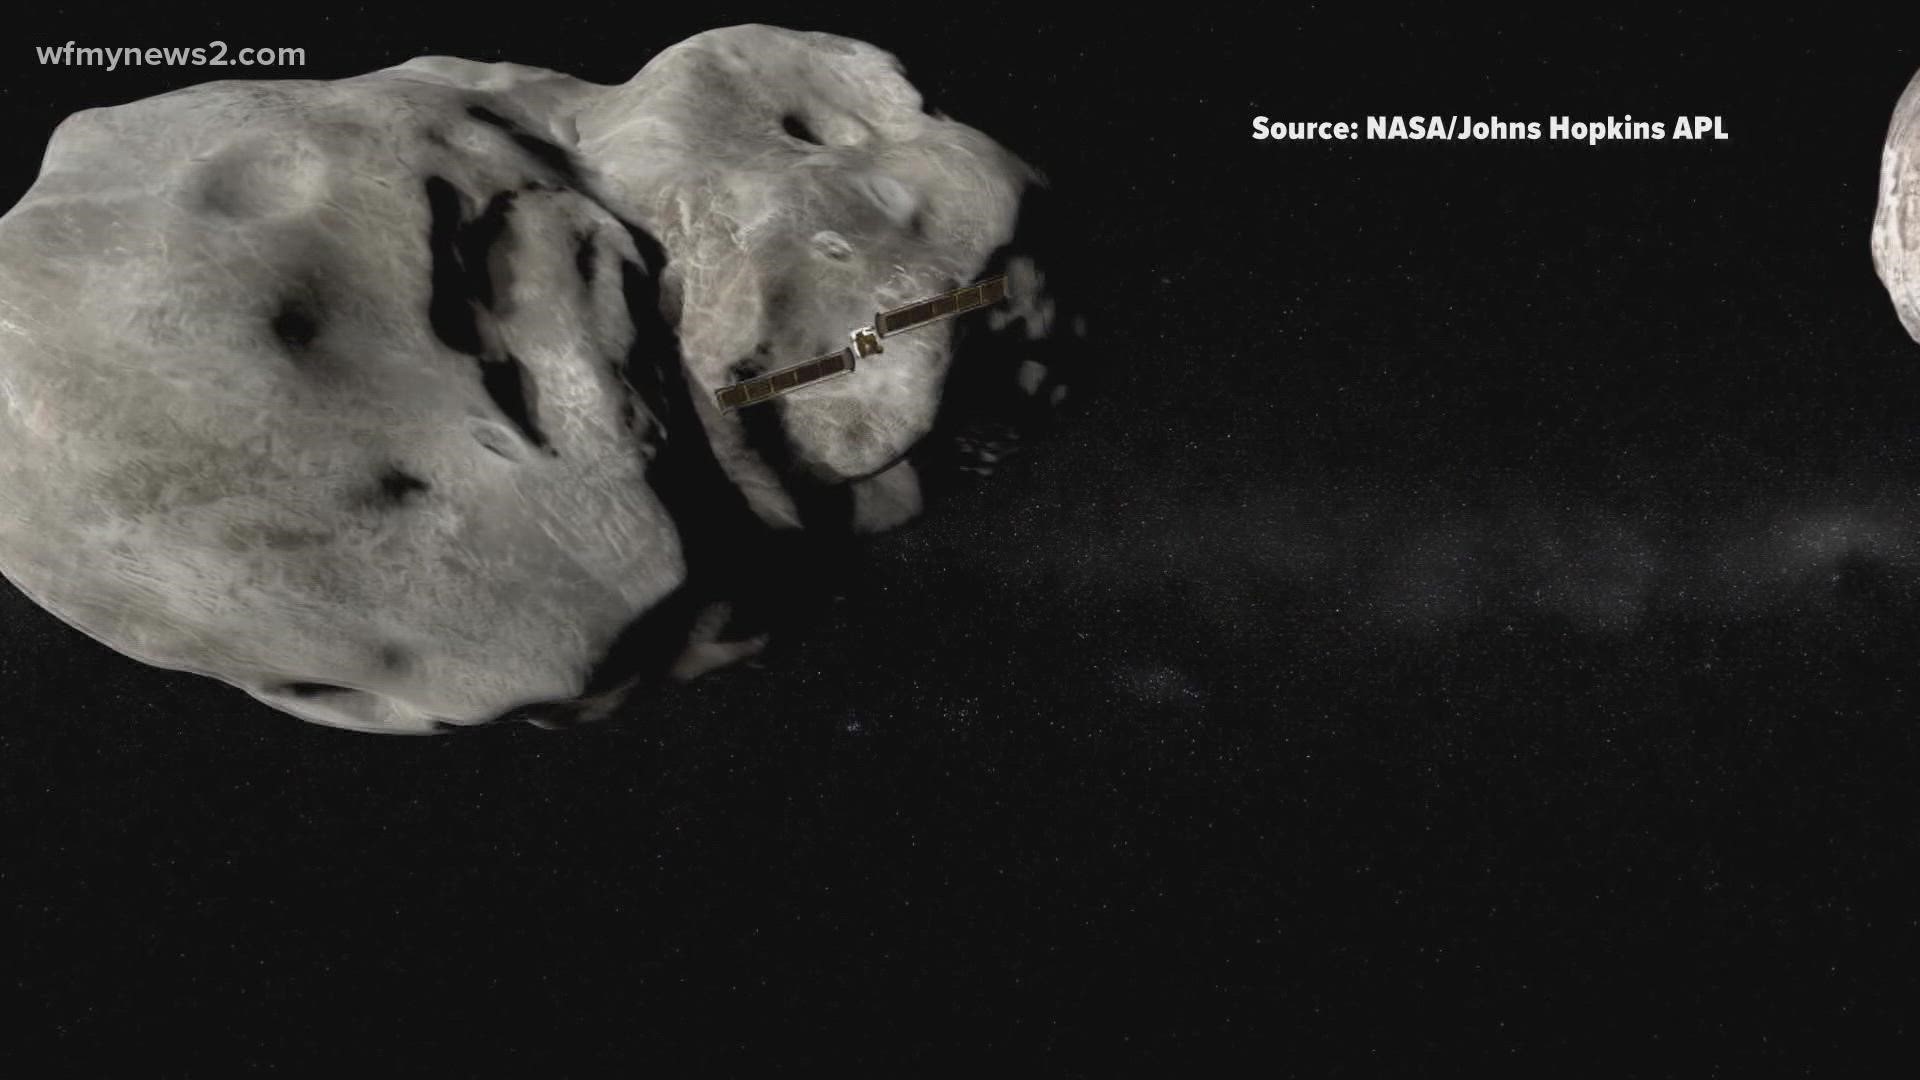 NASA is working on a double asteroid redirection tests. The test involves intercepting an asteroid that won’t near the planet for months.